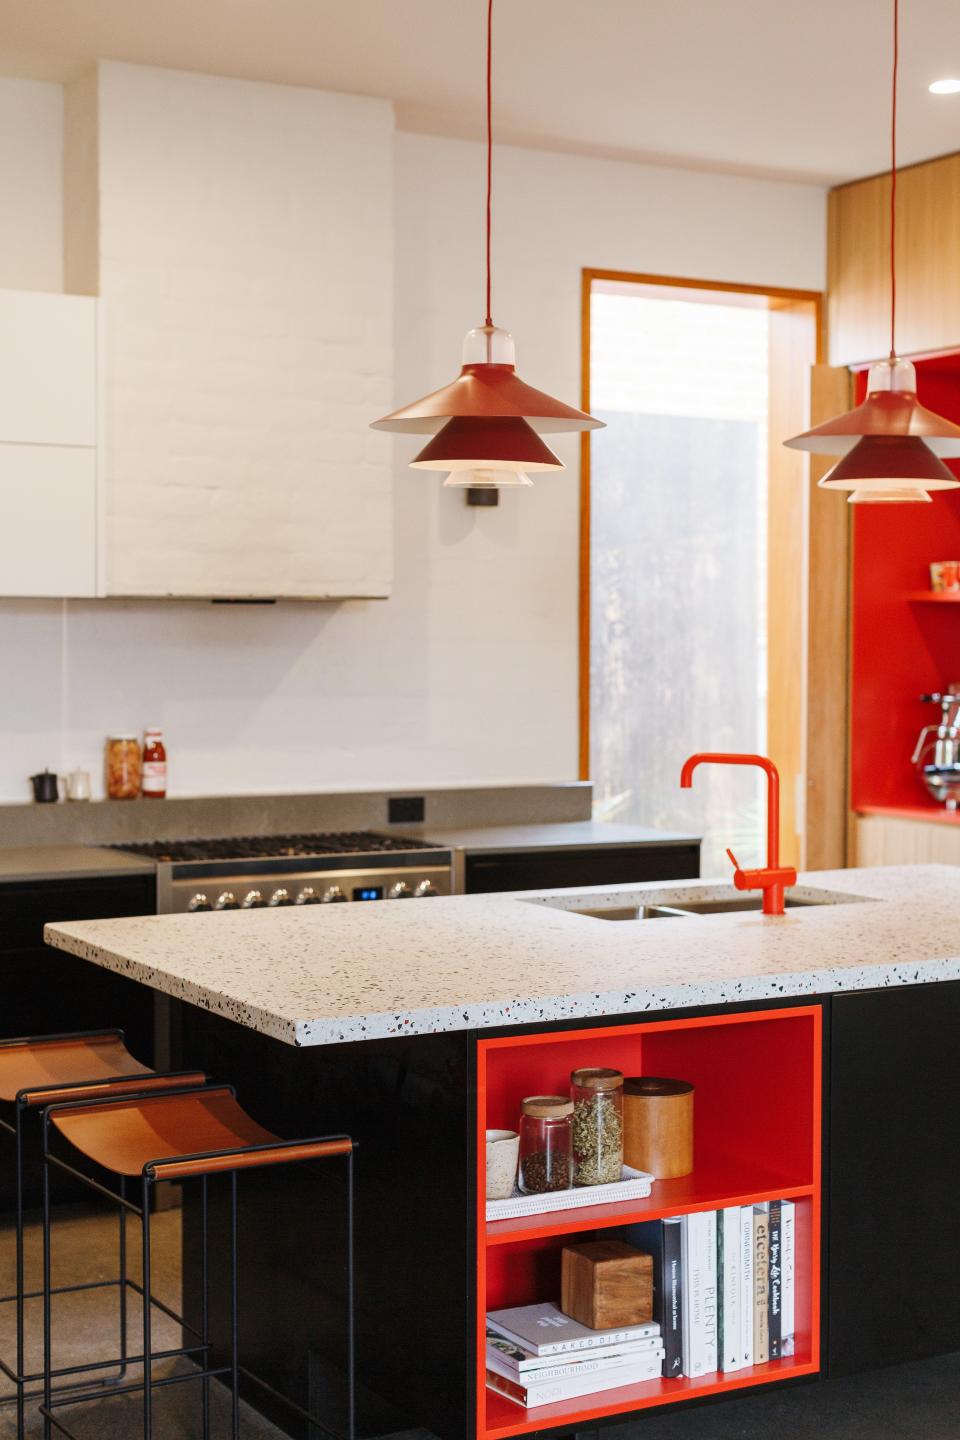 Pops of red were one of the most important elements of the design, especially in the kitchen. Kate wanted it to be a playful contrast to the natural wood details, even when it came to the small island nook.